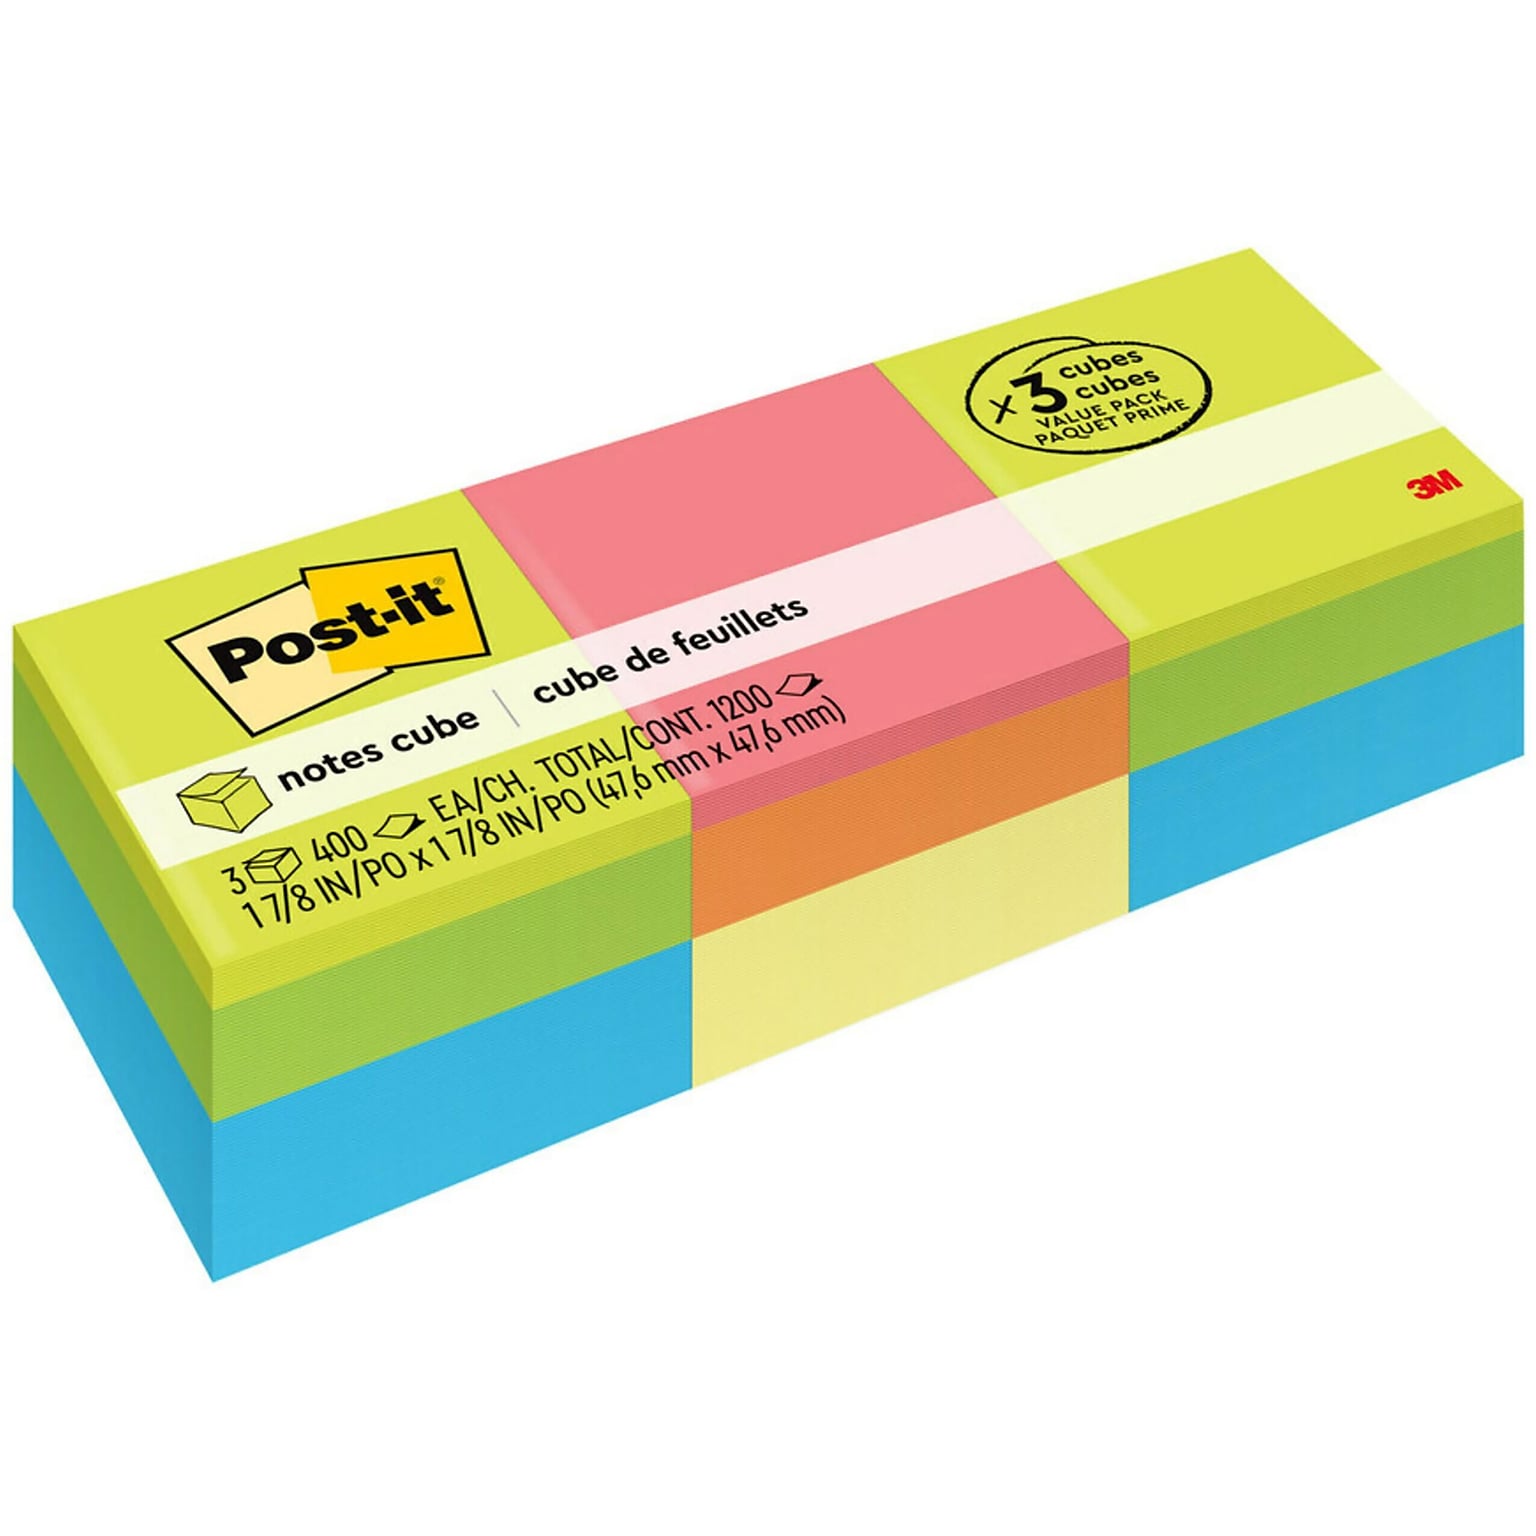 Post-it Notes, 1 7/8 x 1 7/8, Assorted Bright Colors, 400 Sheets/Pad, 3 Pads/Pack (2051-3PK)